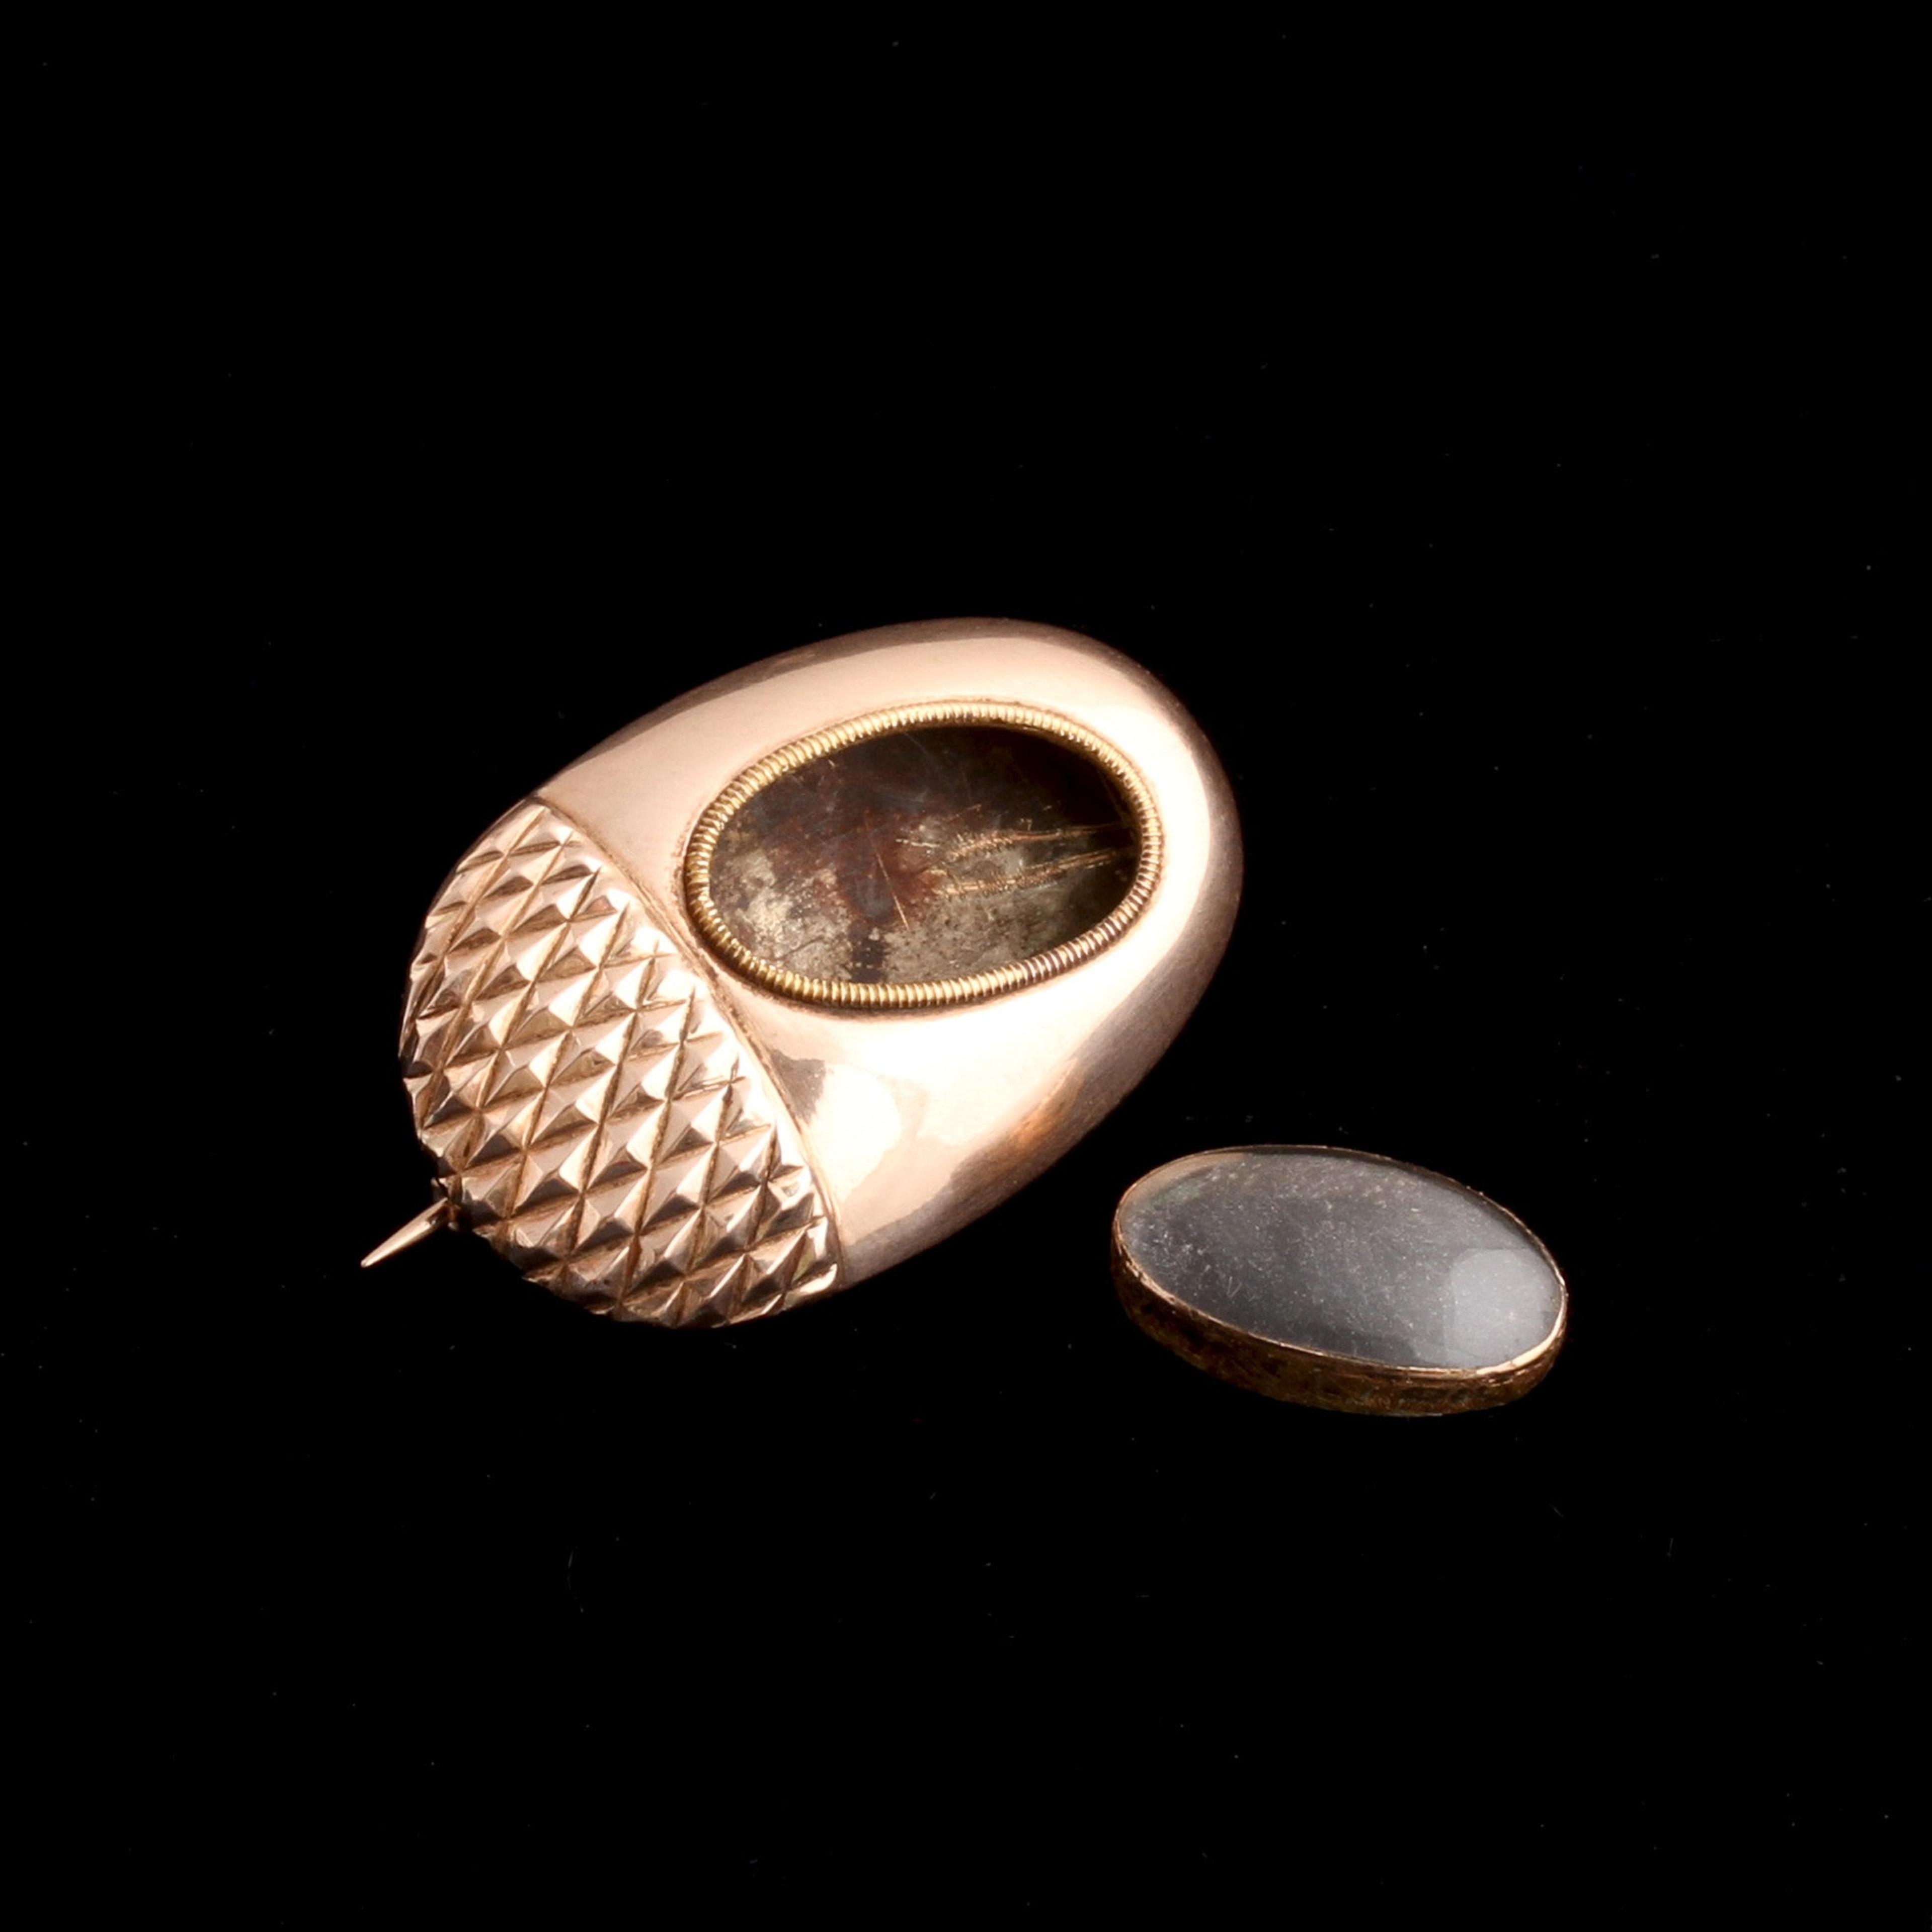 Detail of Early Victorian Acorn Locket Brooch with locket glass removed